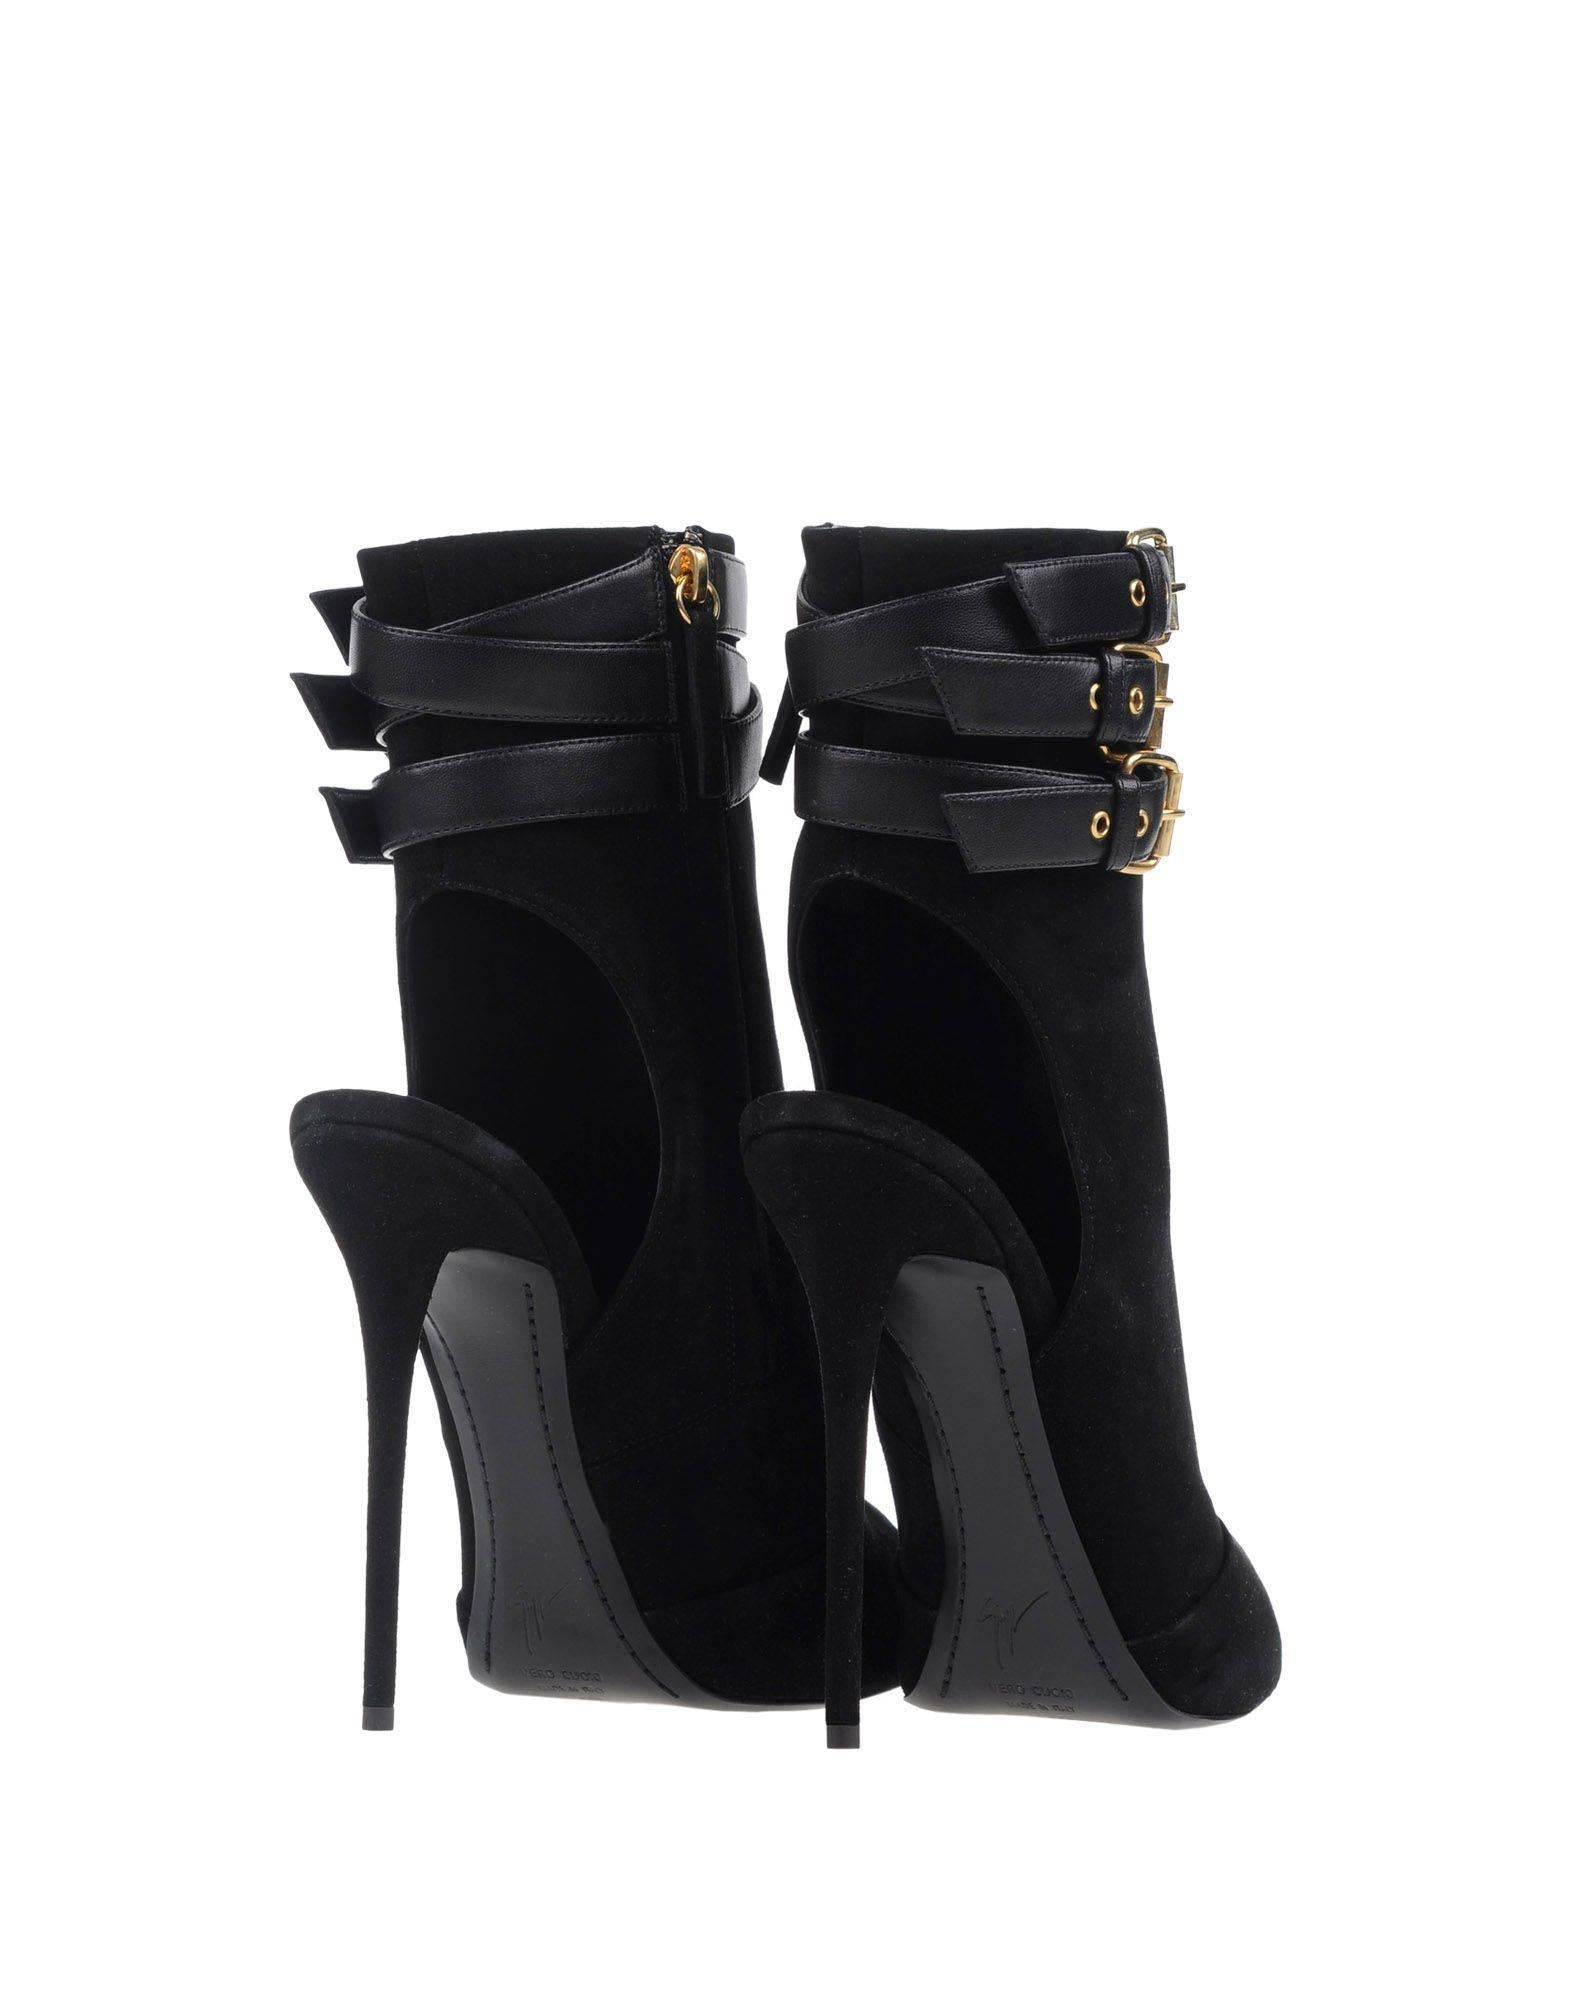 Giuseppe Zanotti New Black Suede Leather Buckle Ankle Boots Booties in Box In New Condition In Chicago, IL